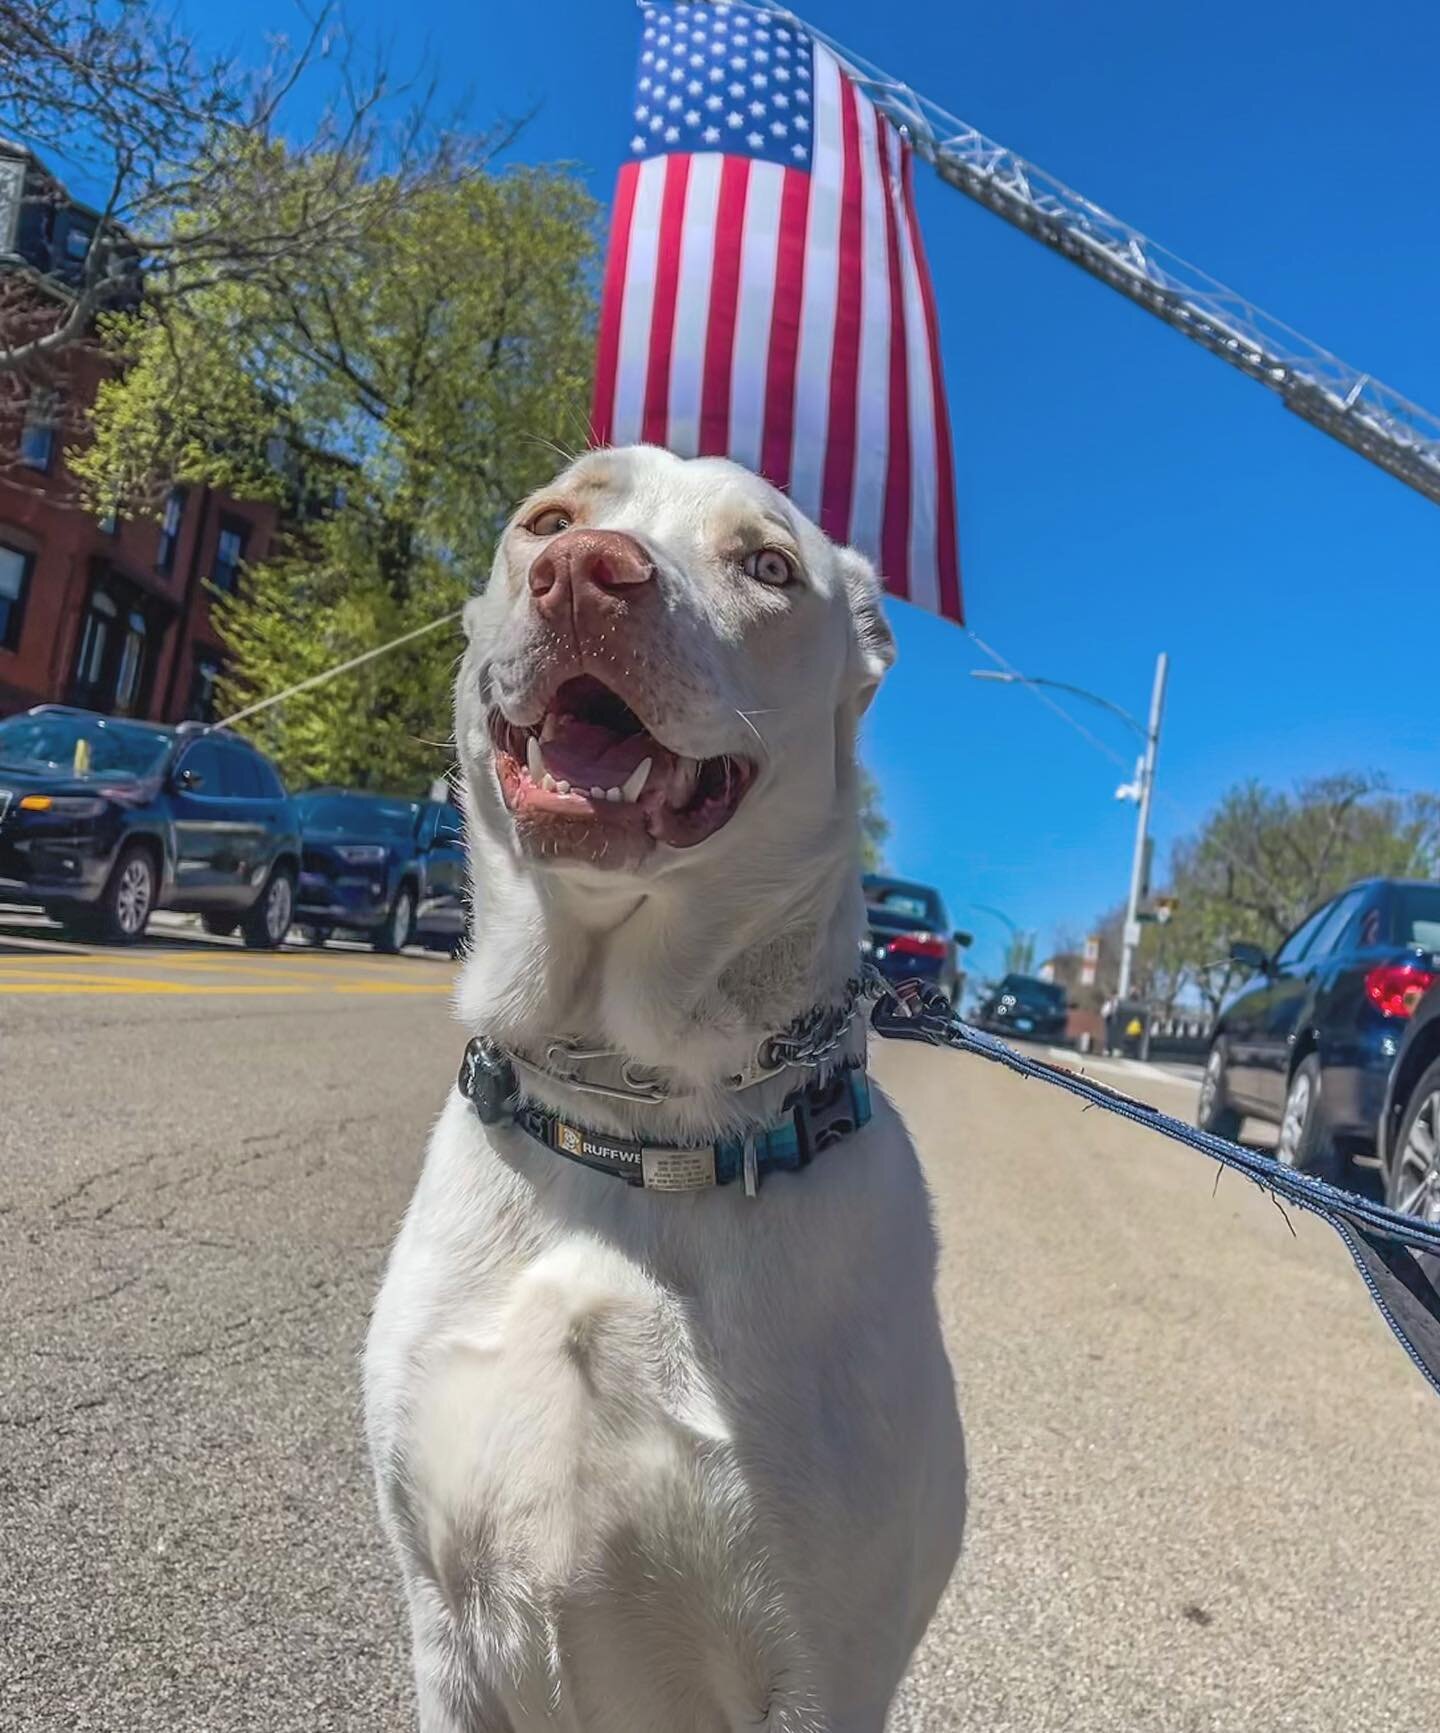 #america 🇺🇸 #happybithday 🎂 #thankyou for being such an #amazing country! 🇺🇸 
:
:
:
:
:
#happypawsboston #happydog #happiness #happy #dog #dogsofinstagram #southie #southboston #4thofjuly #happy4thofjuly #usa #southiedogs #02127 #rescuedogsofins